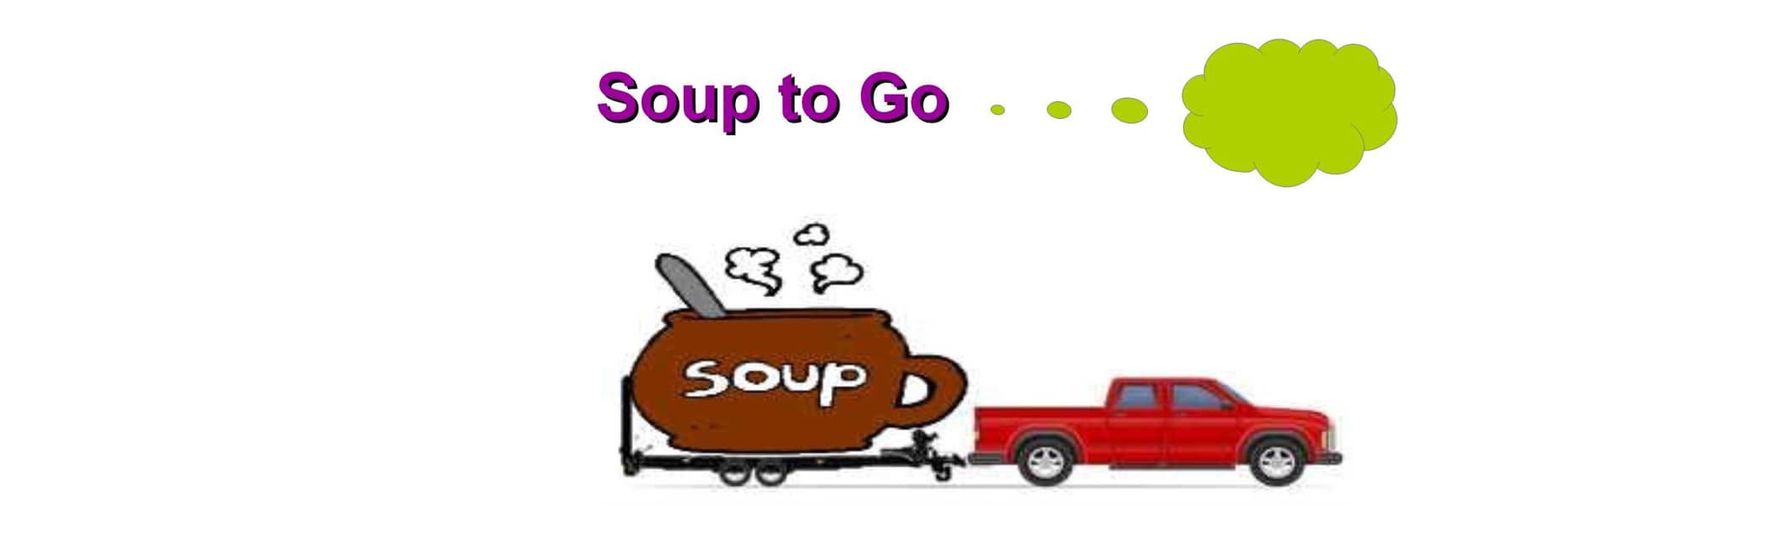 Soup to Go